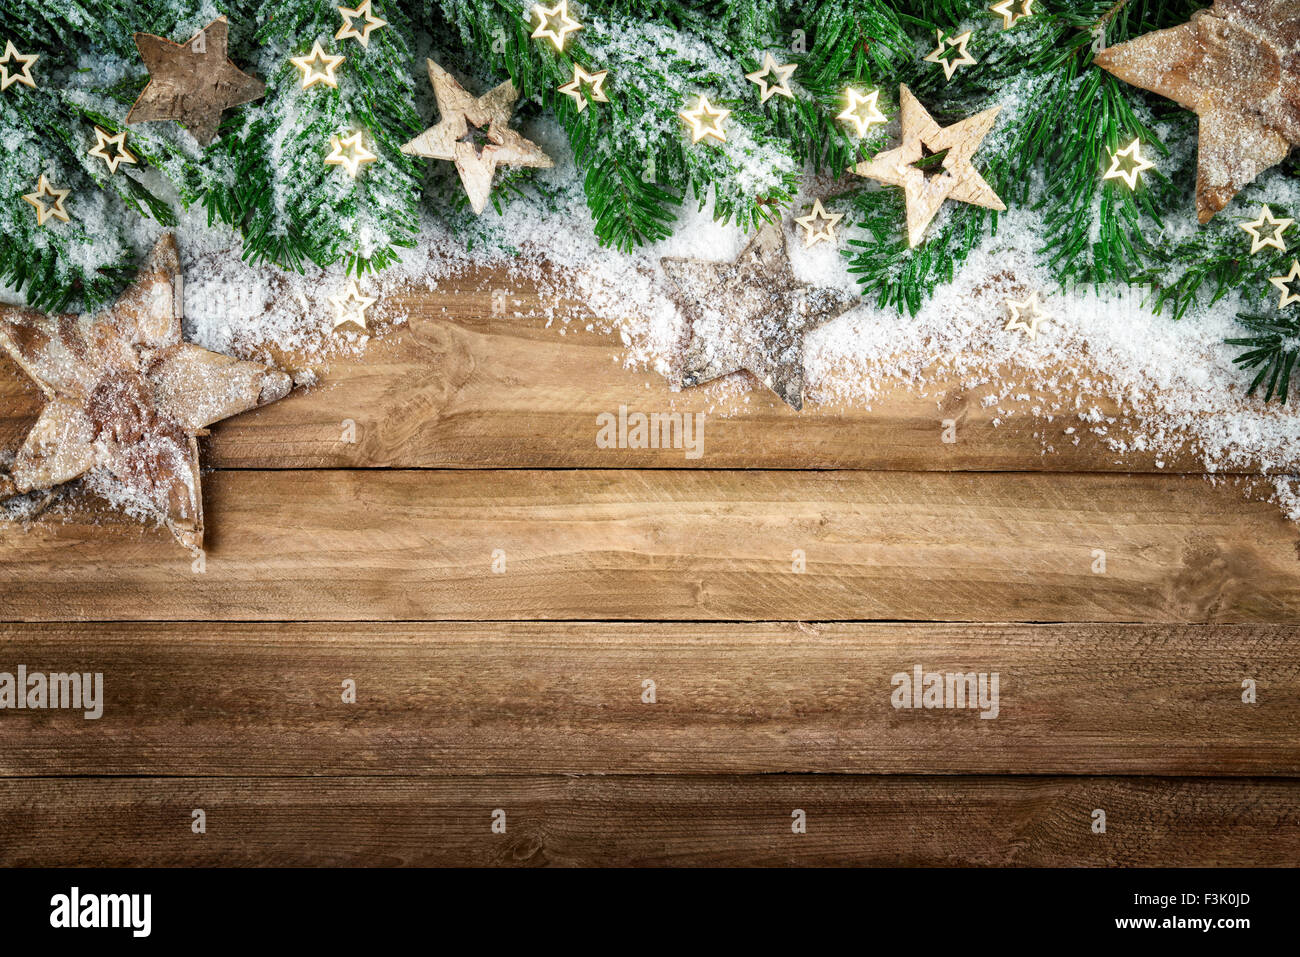 Christmas background in natural wood style, rustic, simple and elegant, with a border of fir branches, wooden stars and snow Stock Photo